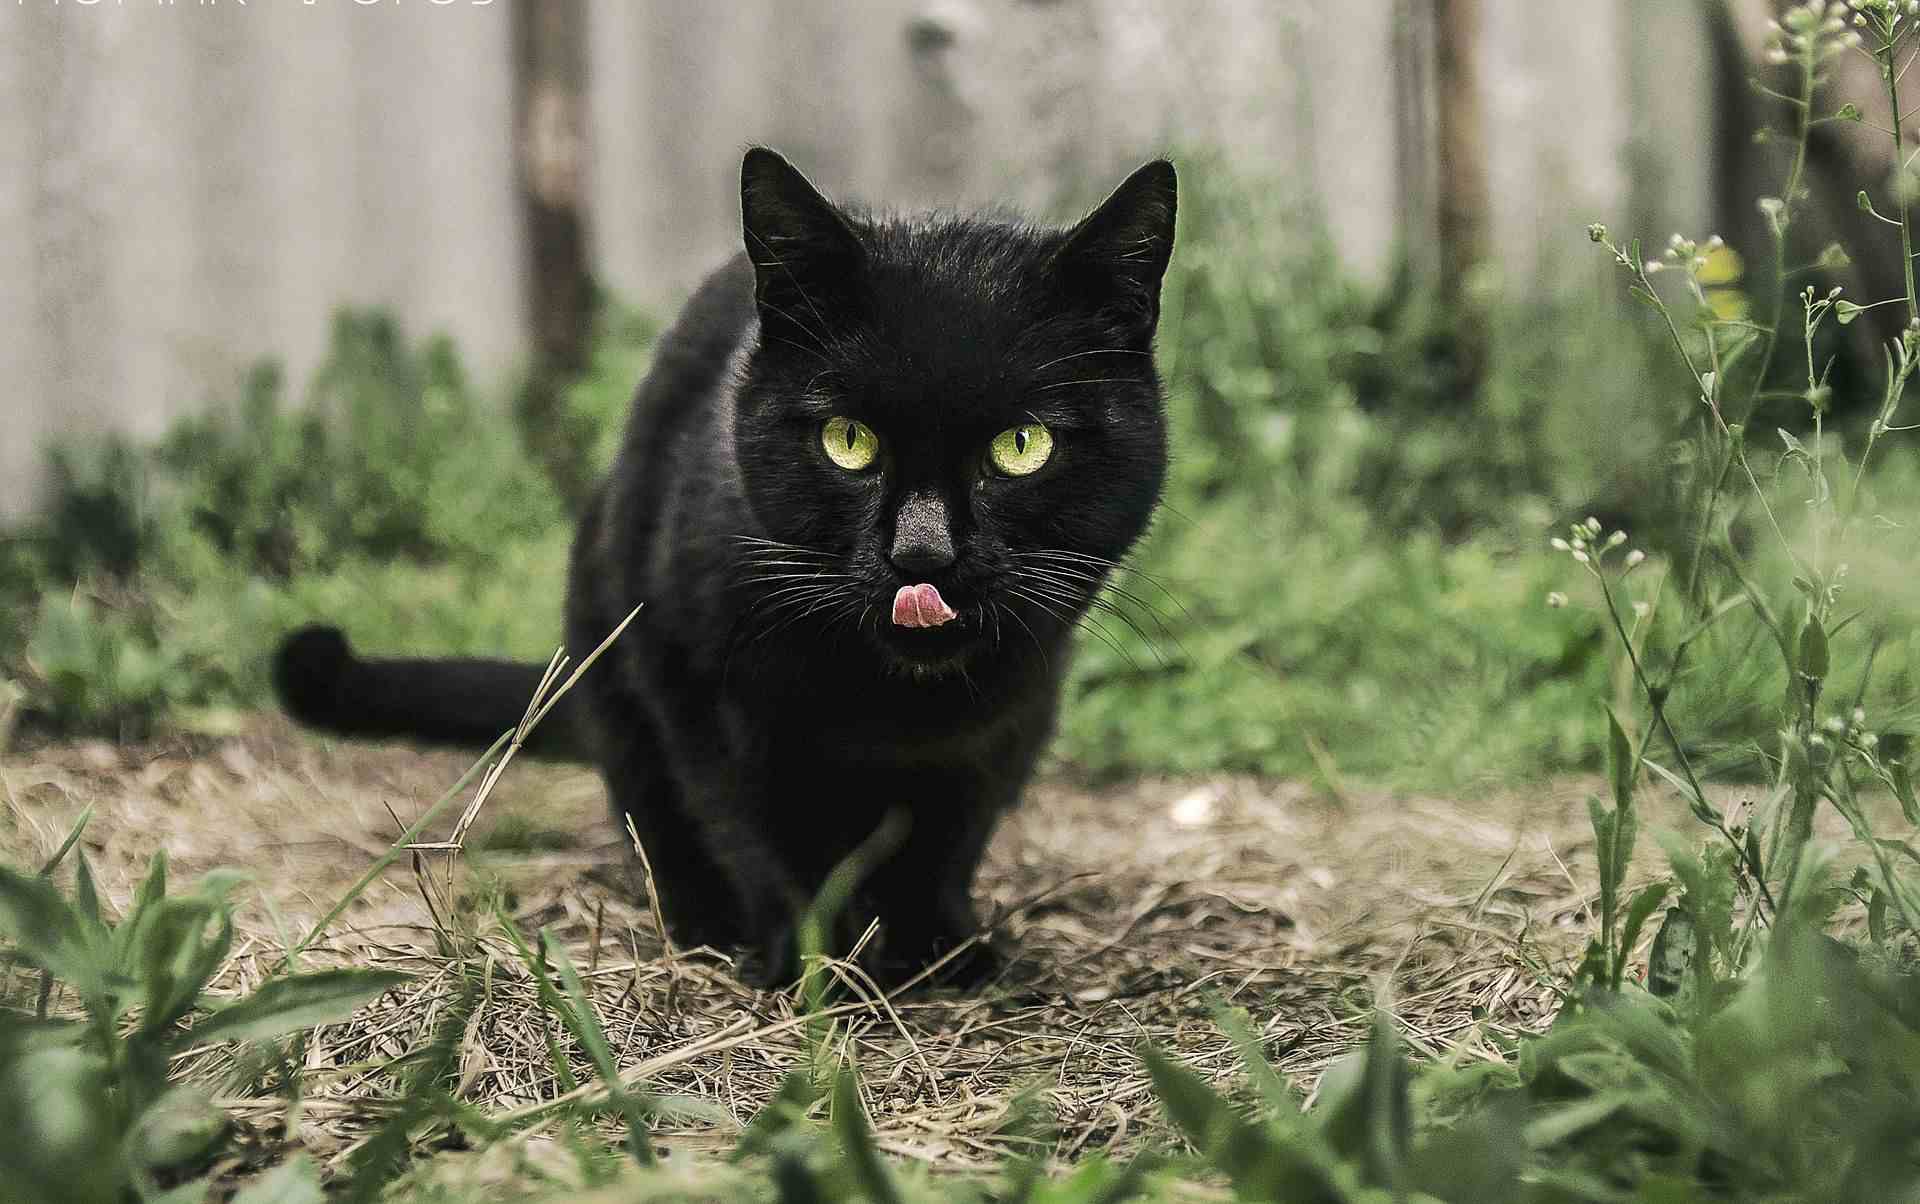 Changing Attitudes about Black Cats